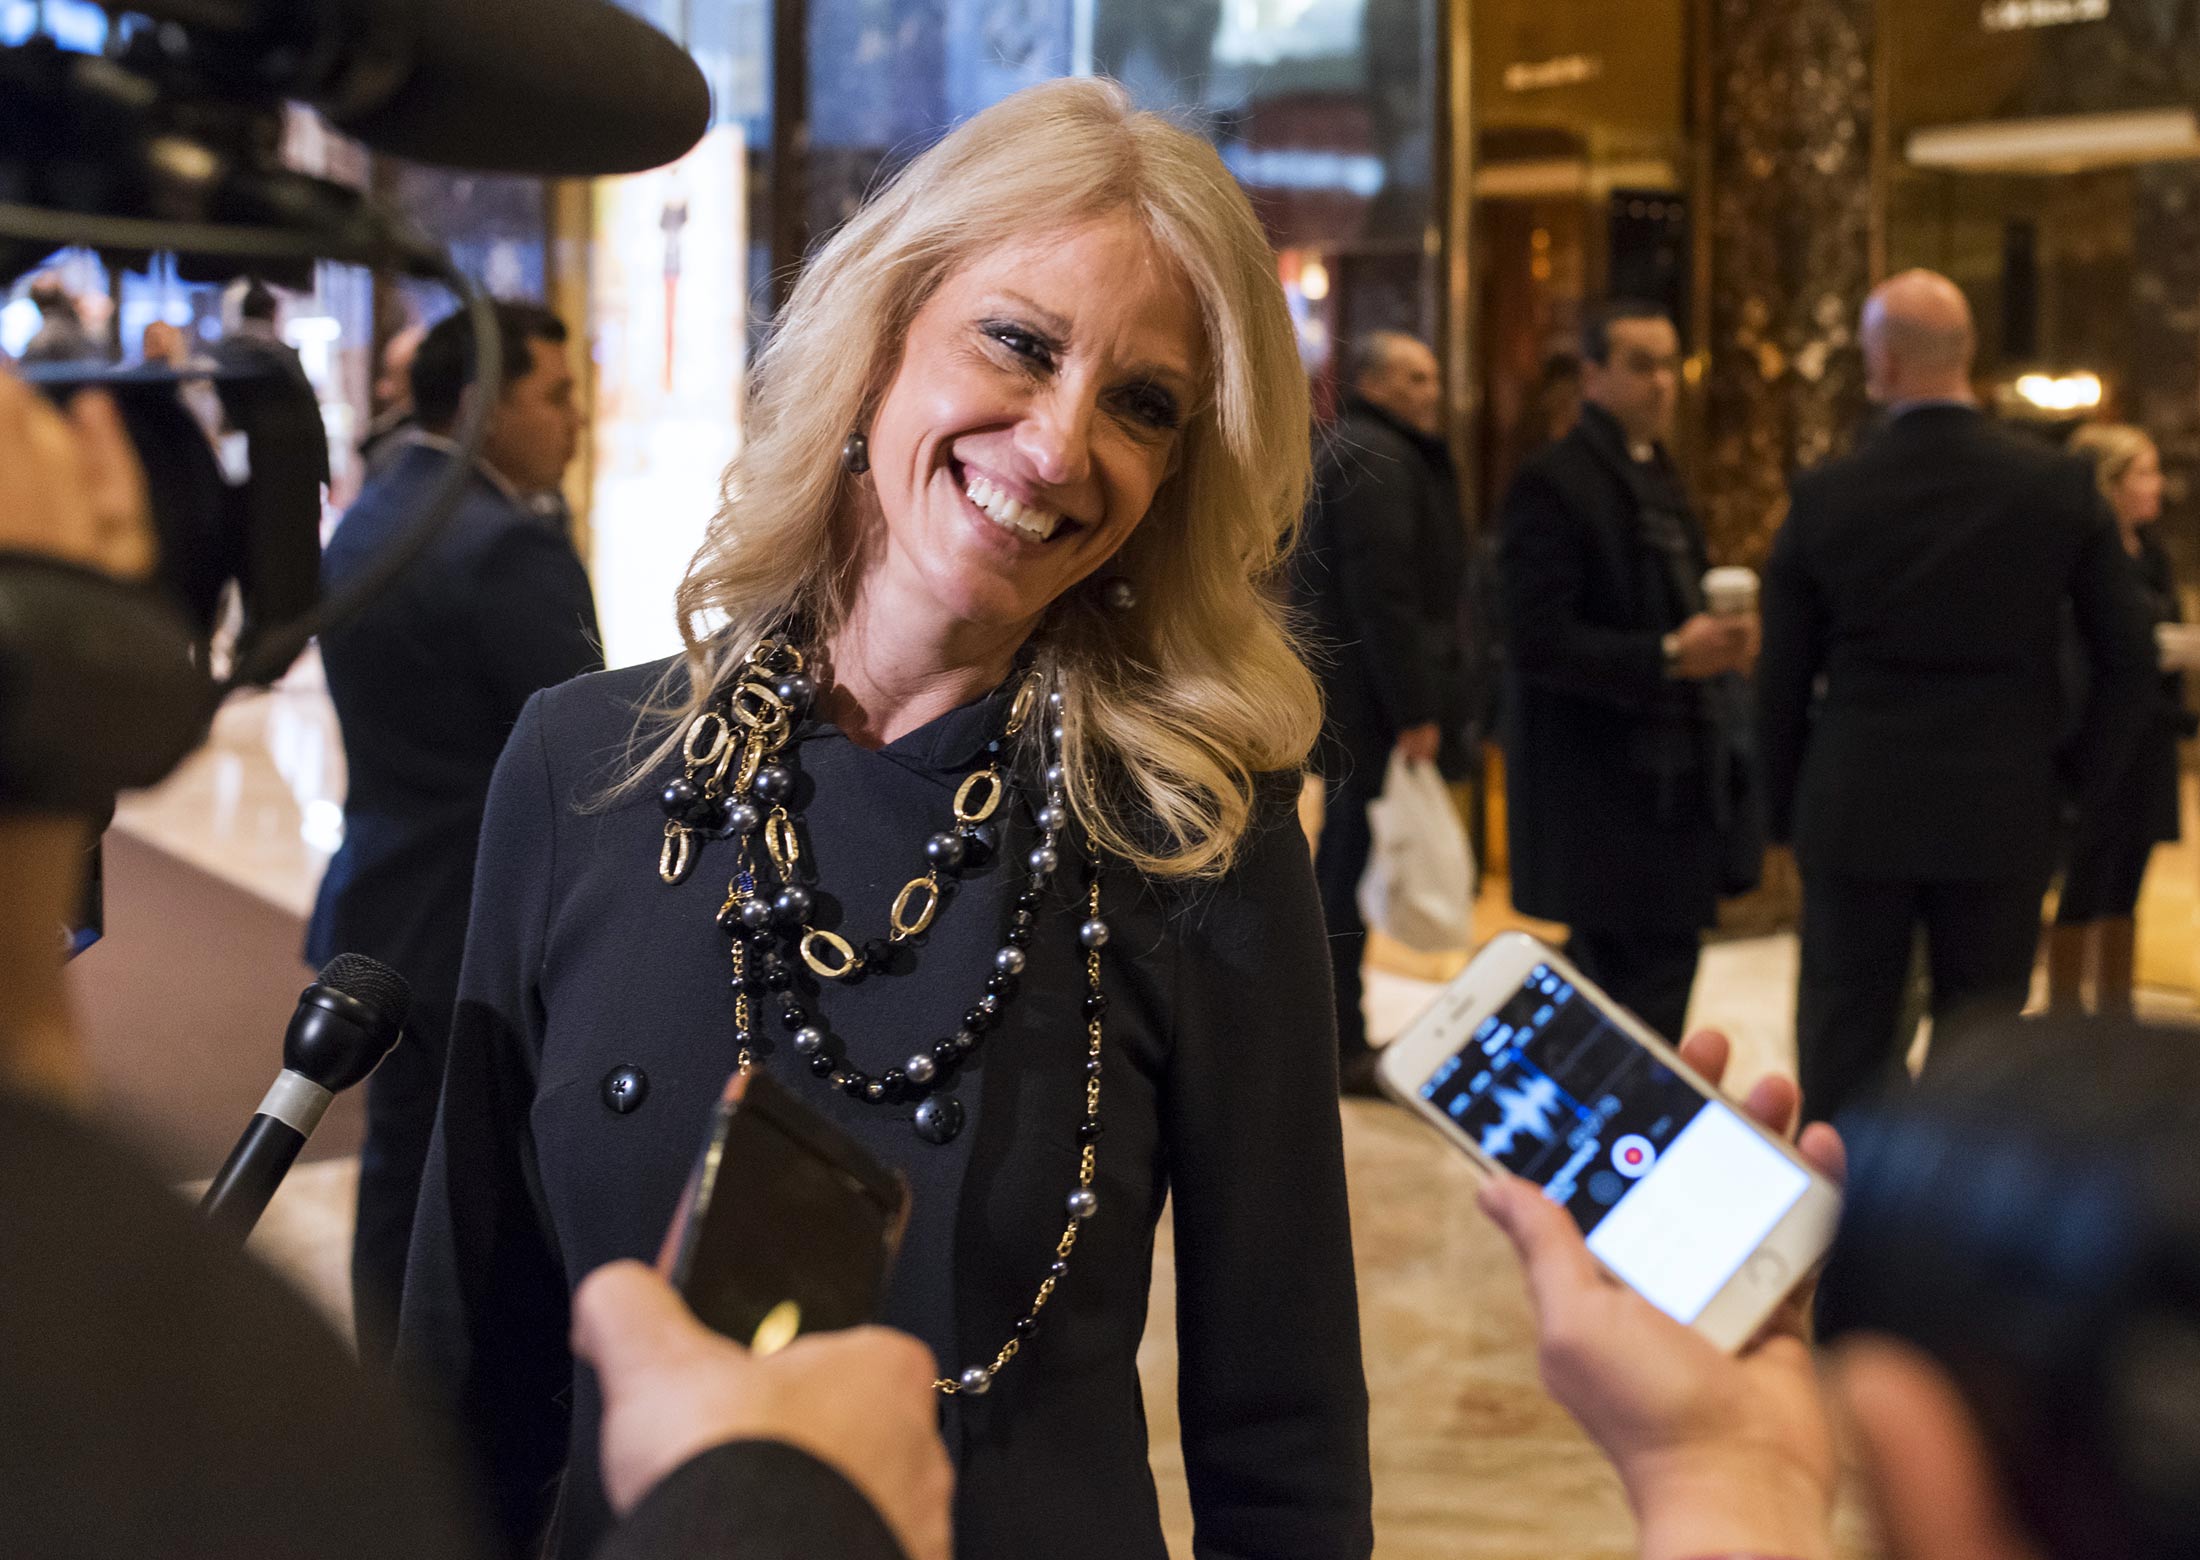 Kellyanne Conway, senior adviser to U.S. President-elect Donald Trump, speaks to members of the media in the lobby of Trump Tower in New York, on Dec. 15.
